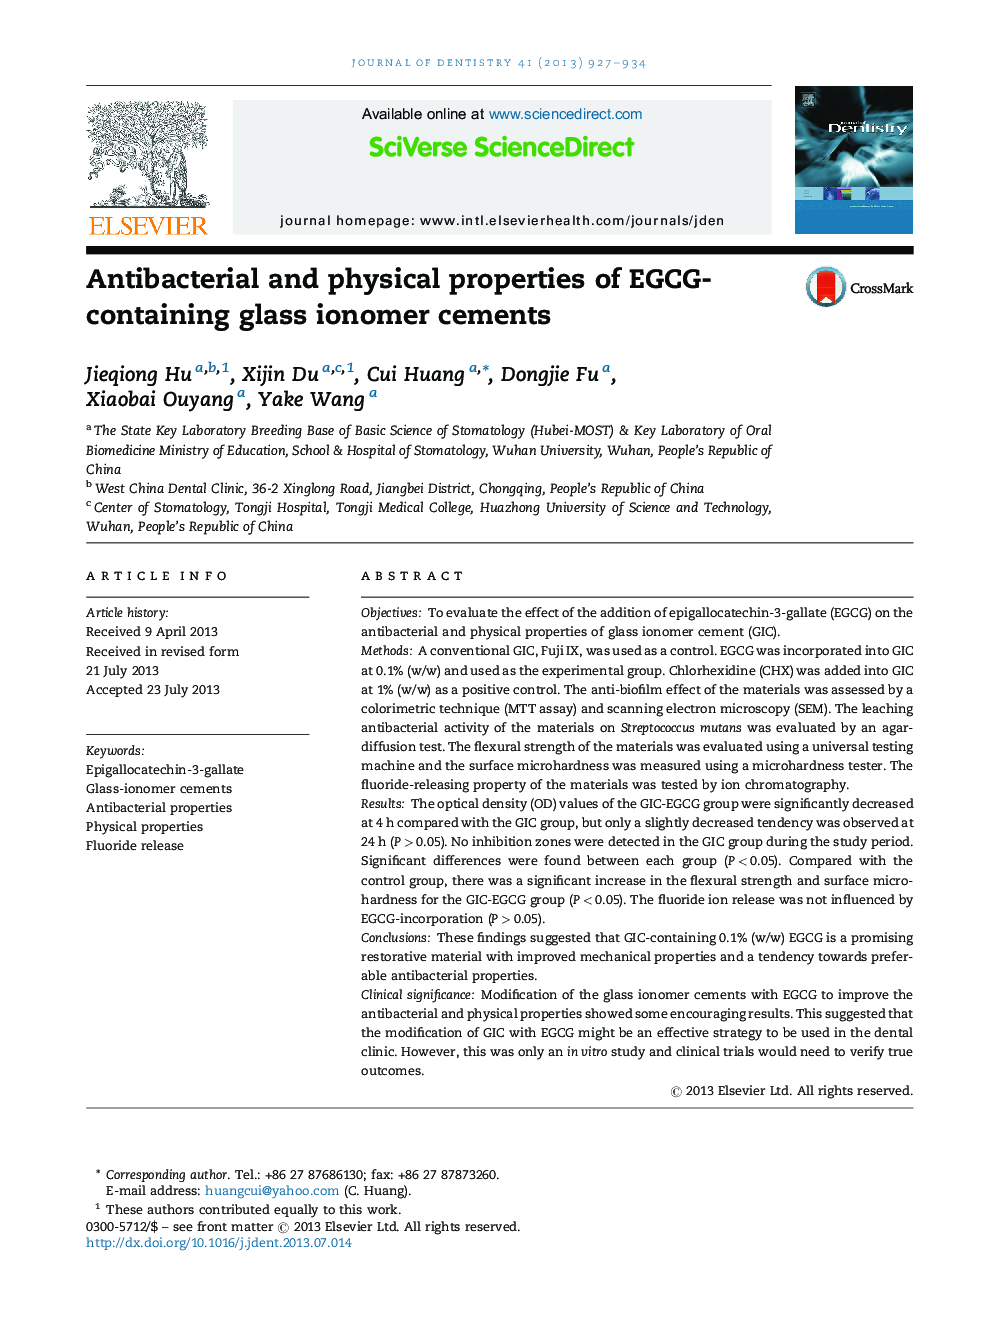 Antibacterial and physical properties of EGCG-containing glass ionomer cements